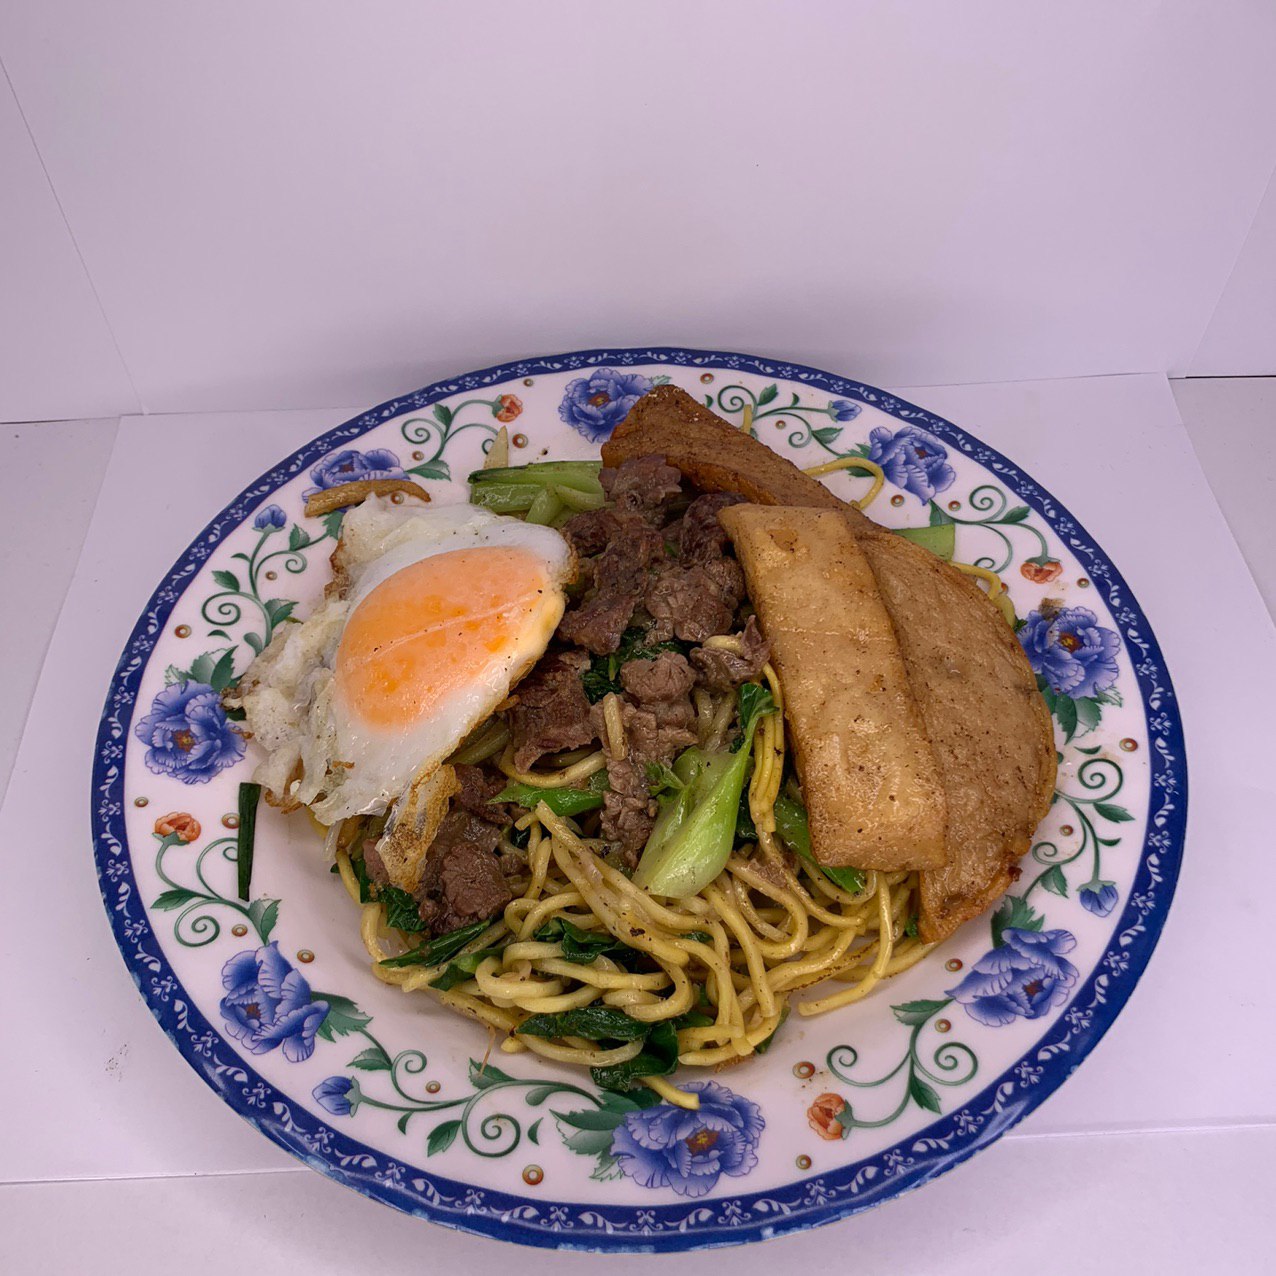 24.Fried Noodle with Patte, Pork and Egg